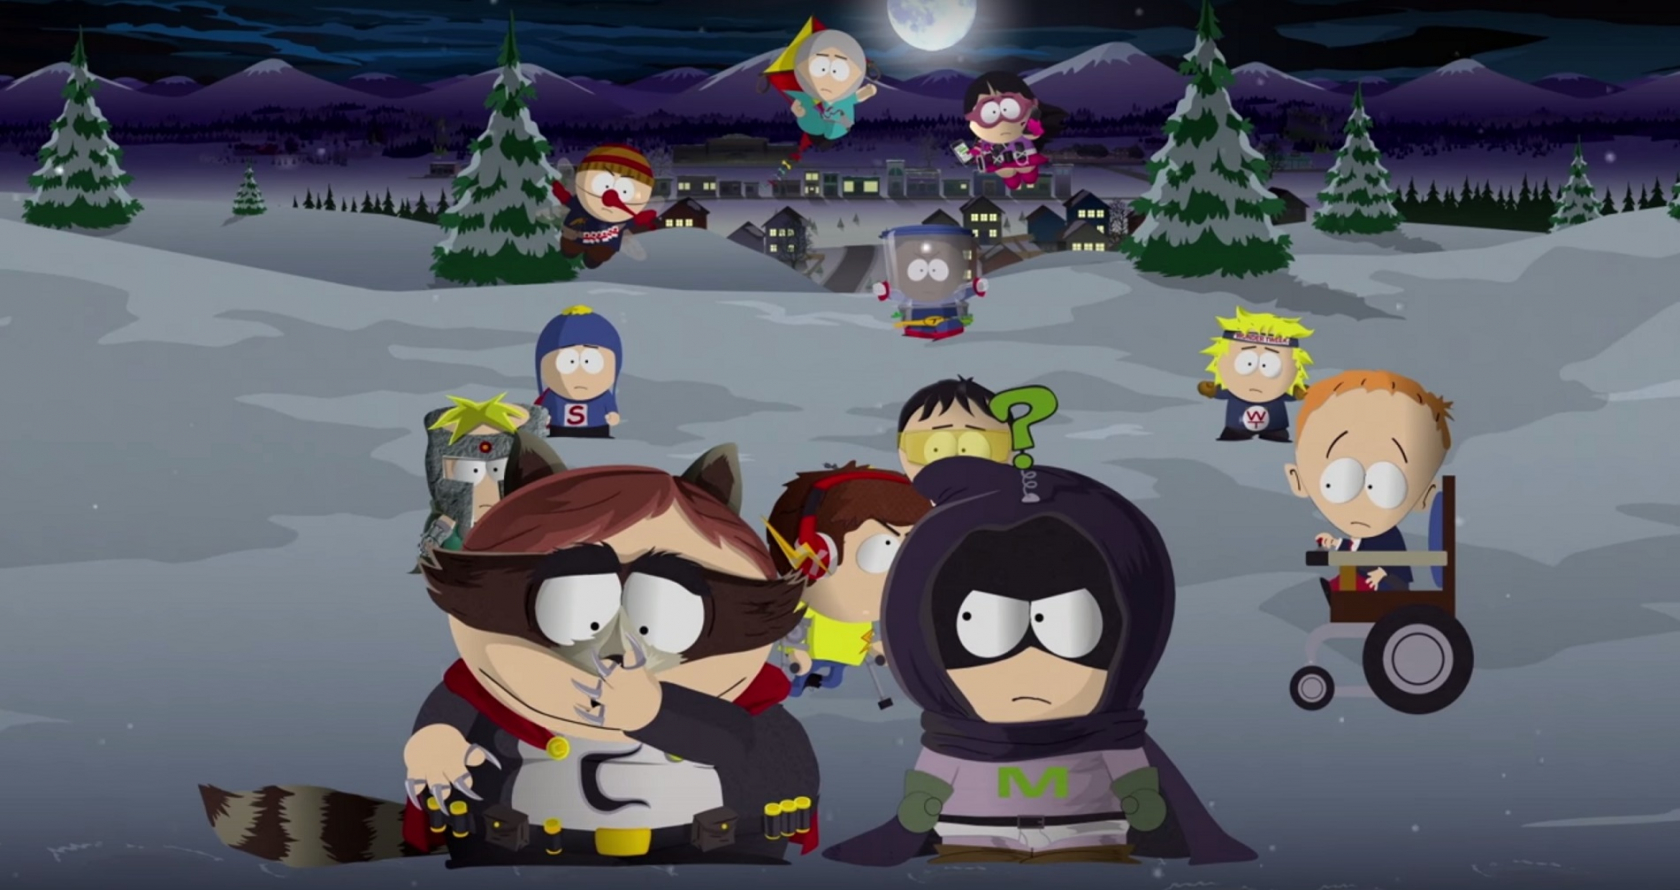 South Park: The Fractured But Whole wants to immortalize your flatulence